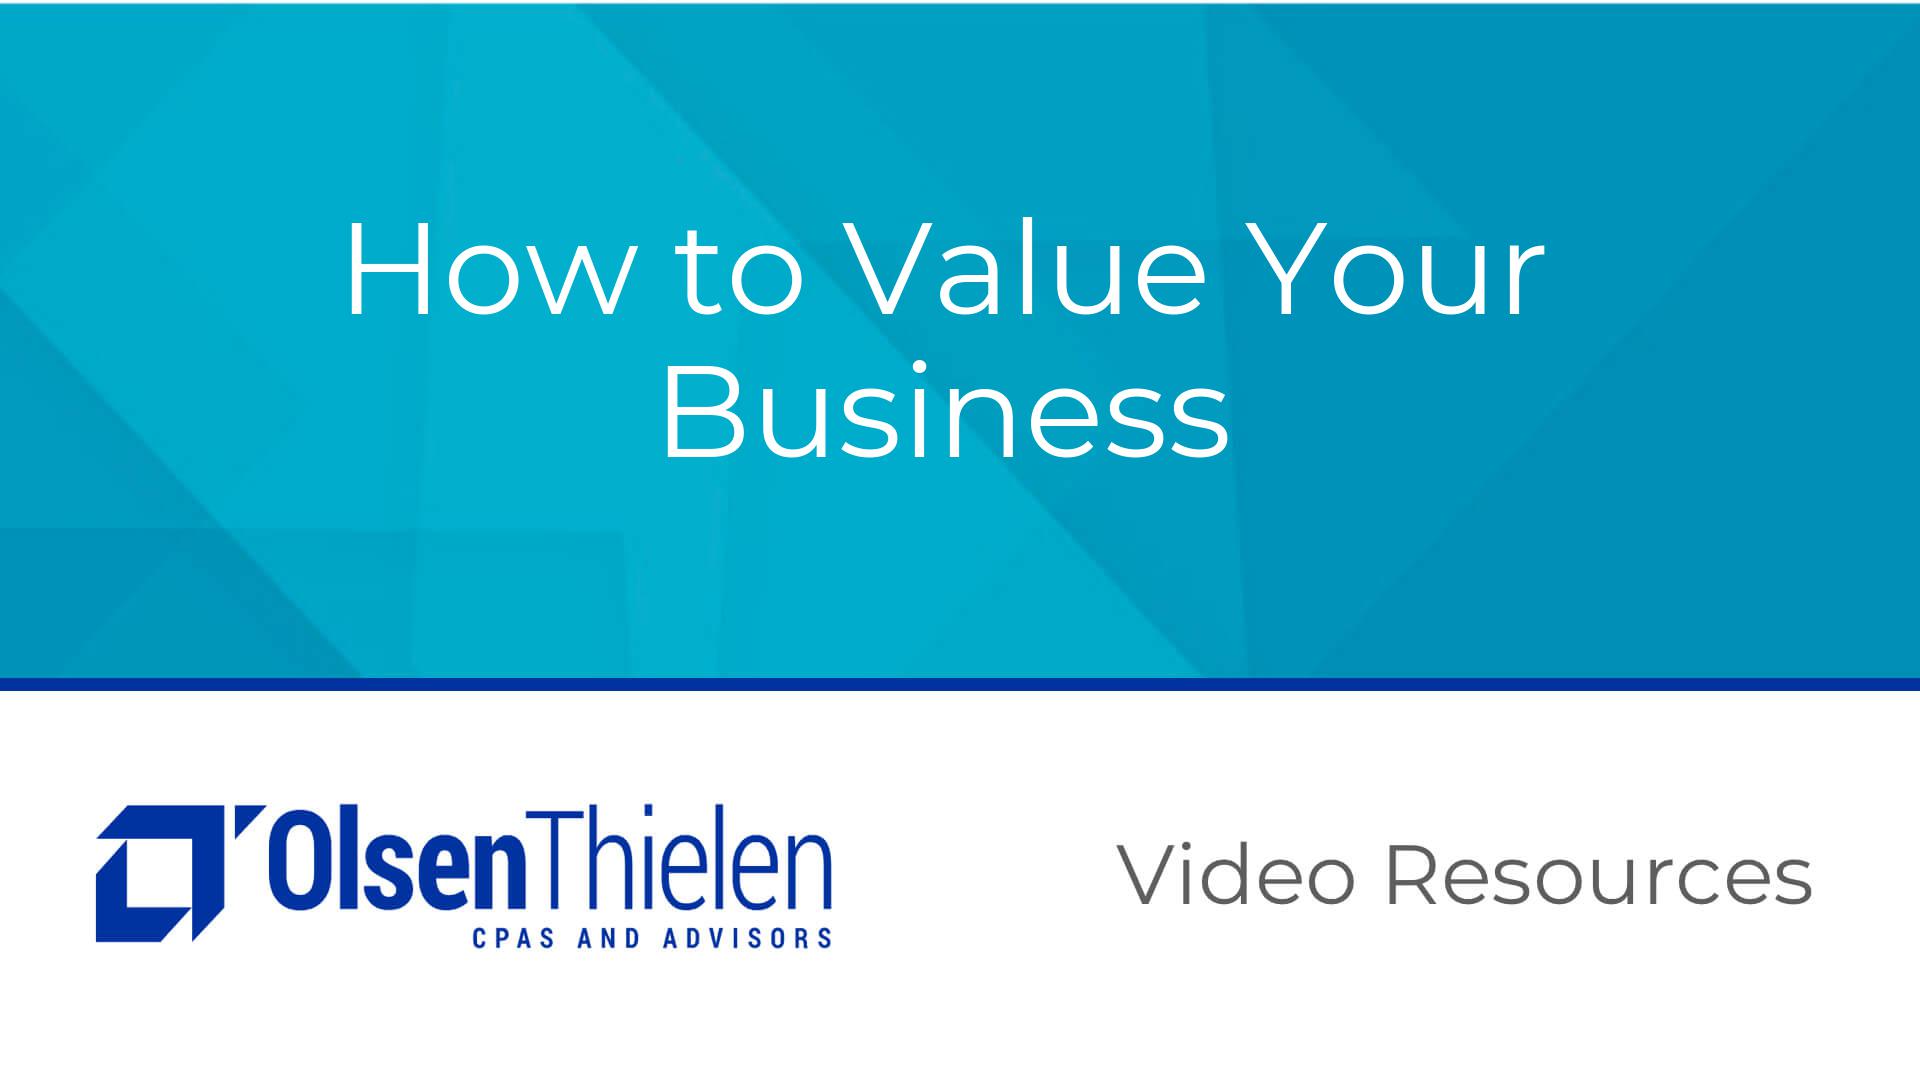 How to Value Your Business